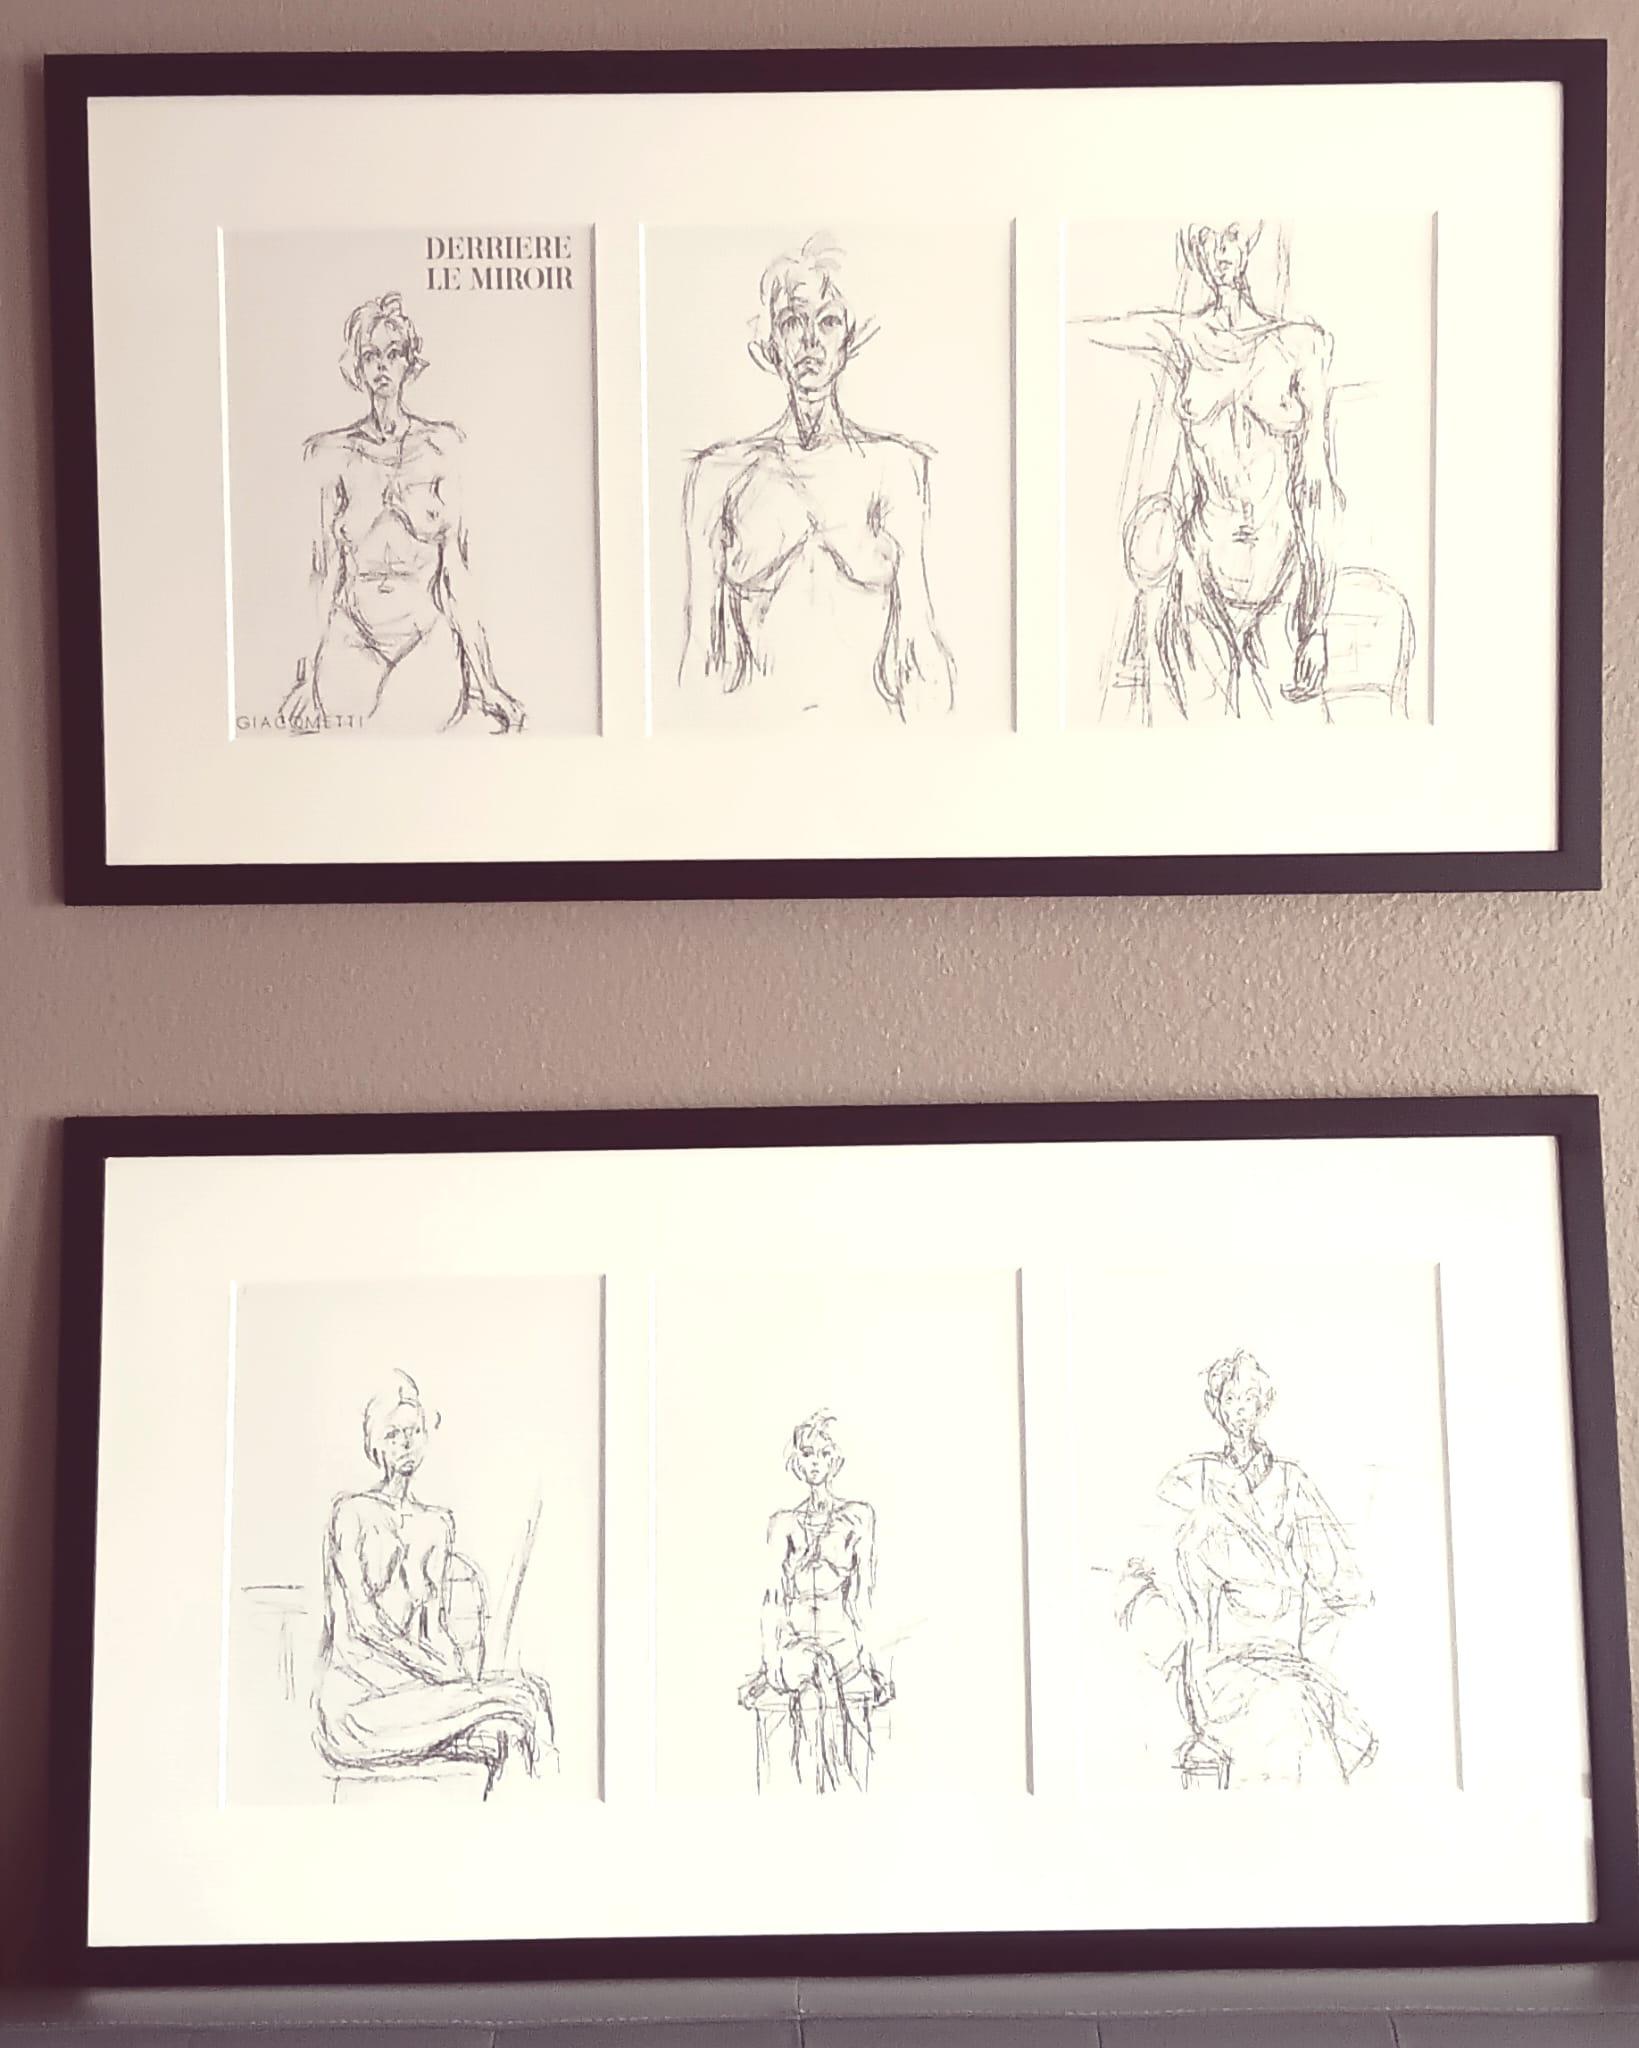 Beautiful Pair of 6 Original Lithographs Portraits from Derriere Le Miroir is a lithograph realized after Alberto Giacometti in 1964.
The artwork is from the art Magazine Derriere Le Miroir.
Printed and Edited by Ateliers de Maeght, Paris,